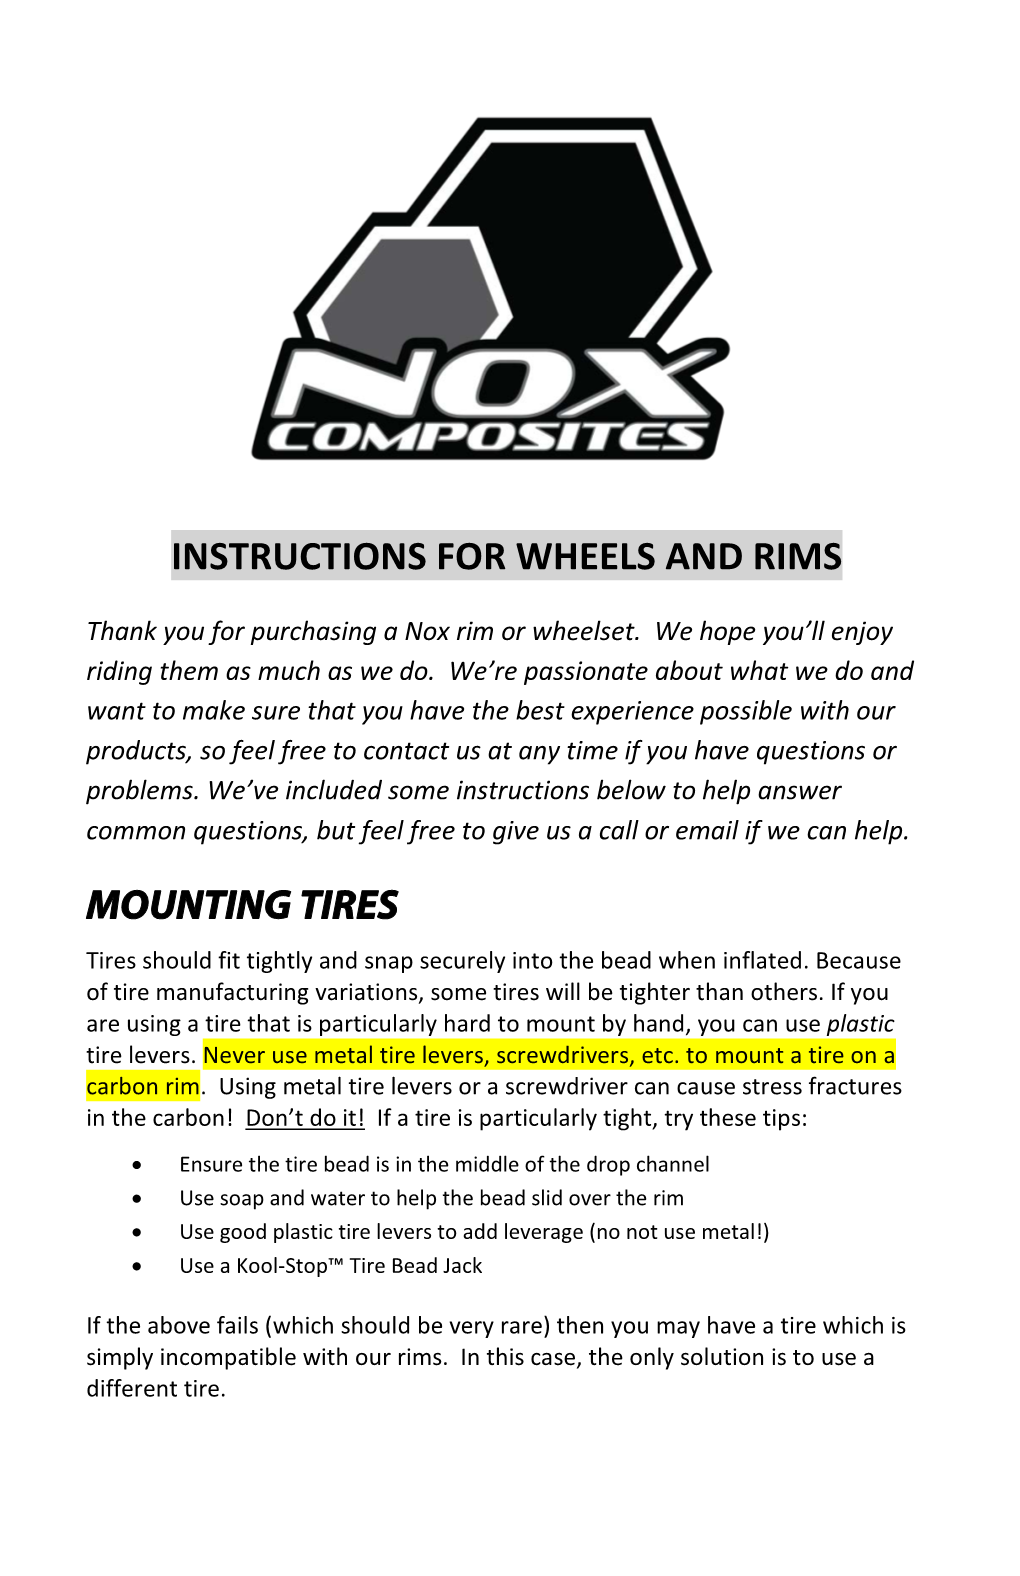 Rim and Wheel Specifications and Instructions